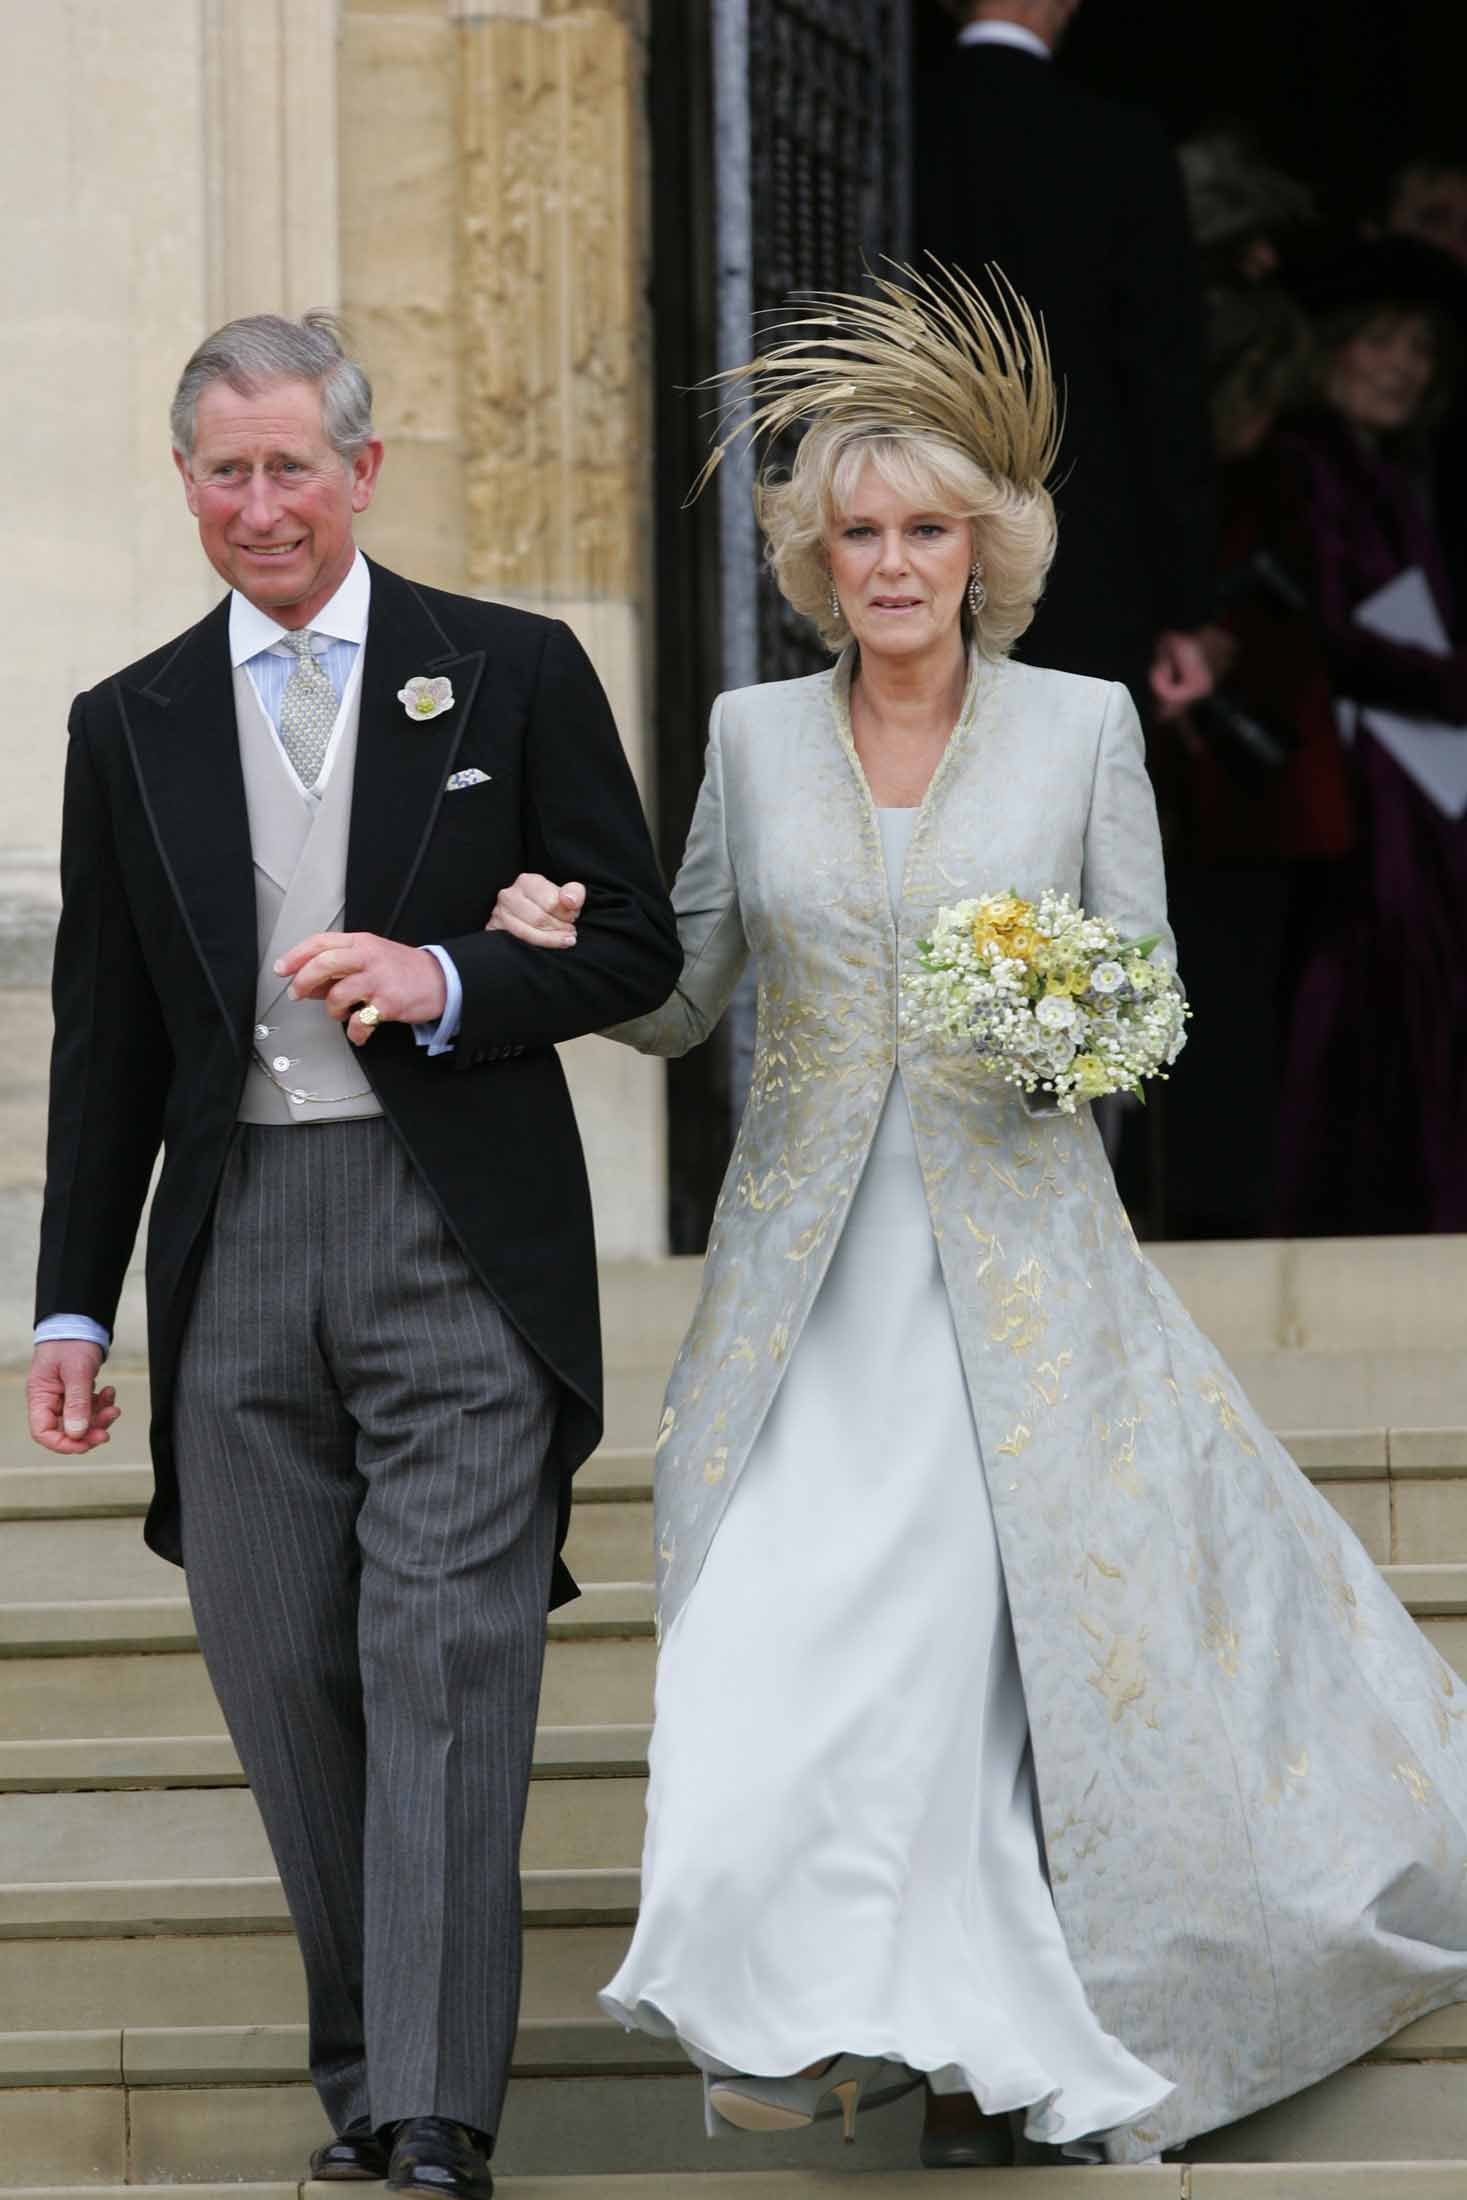 The Prince of Wales and the Duchess of Cornwall leave their wedding ceremony 